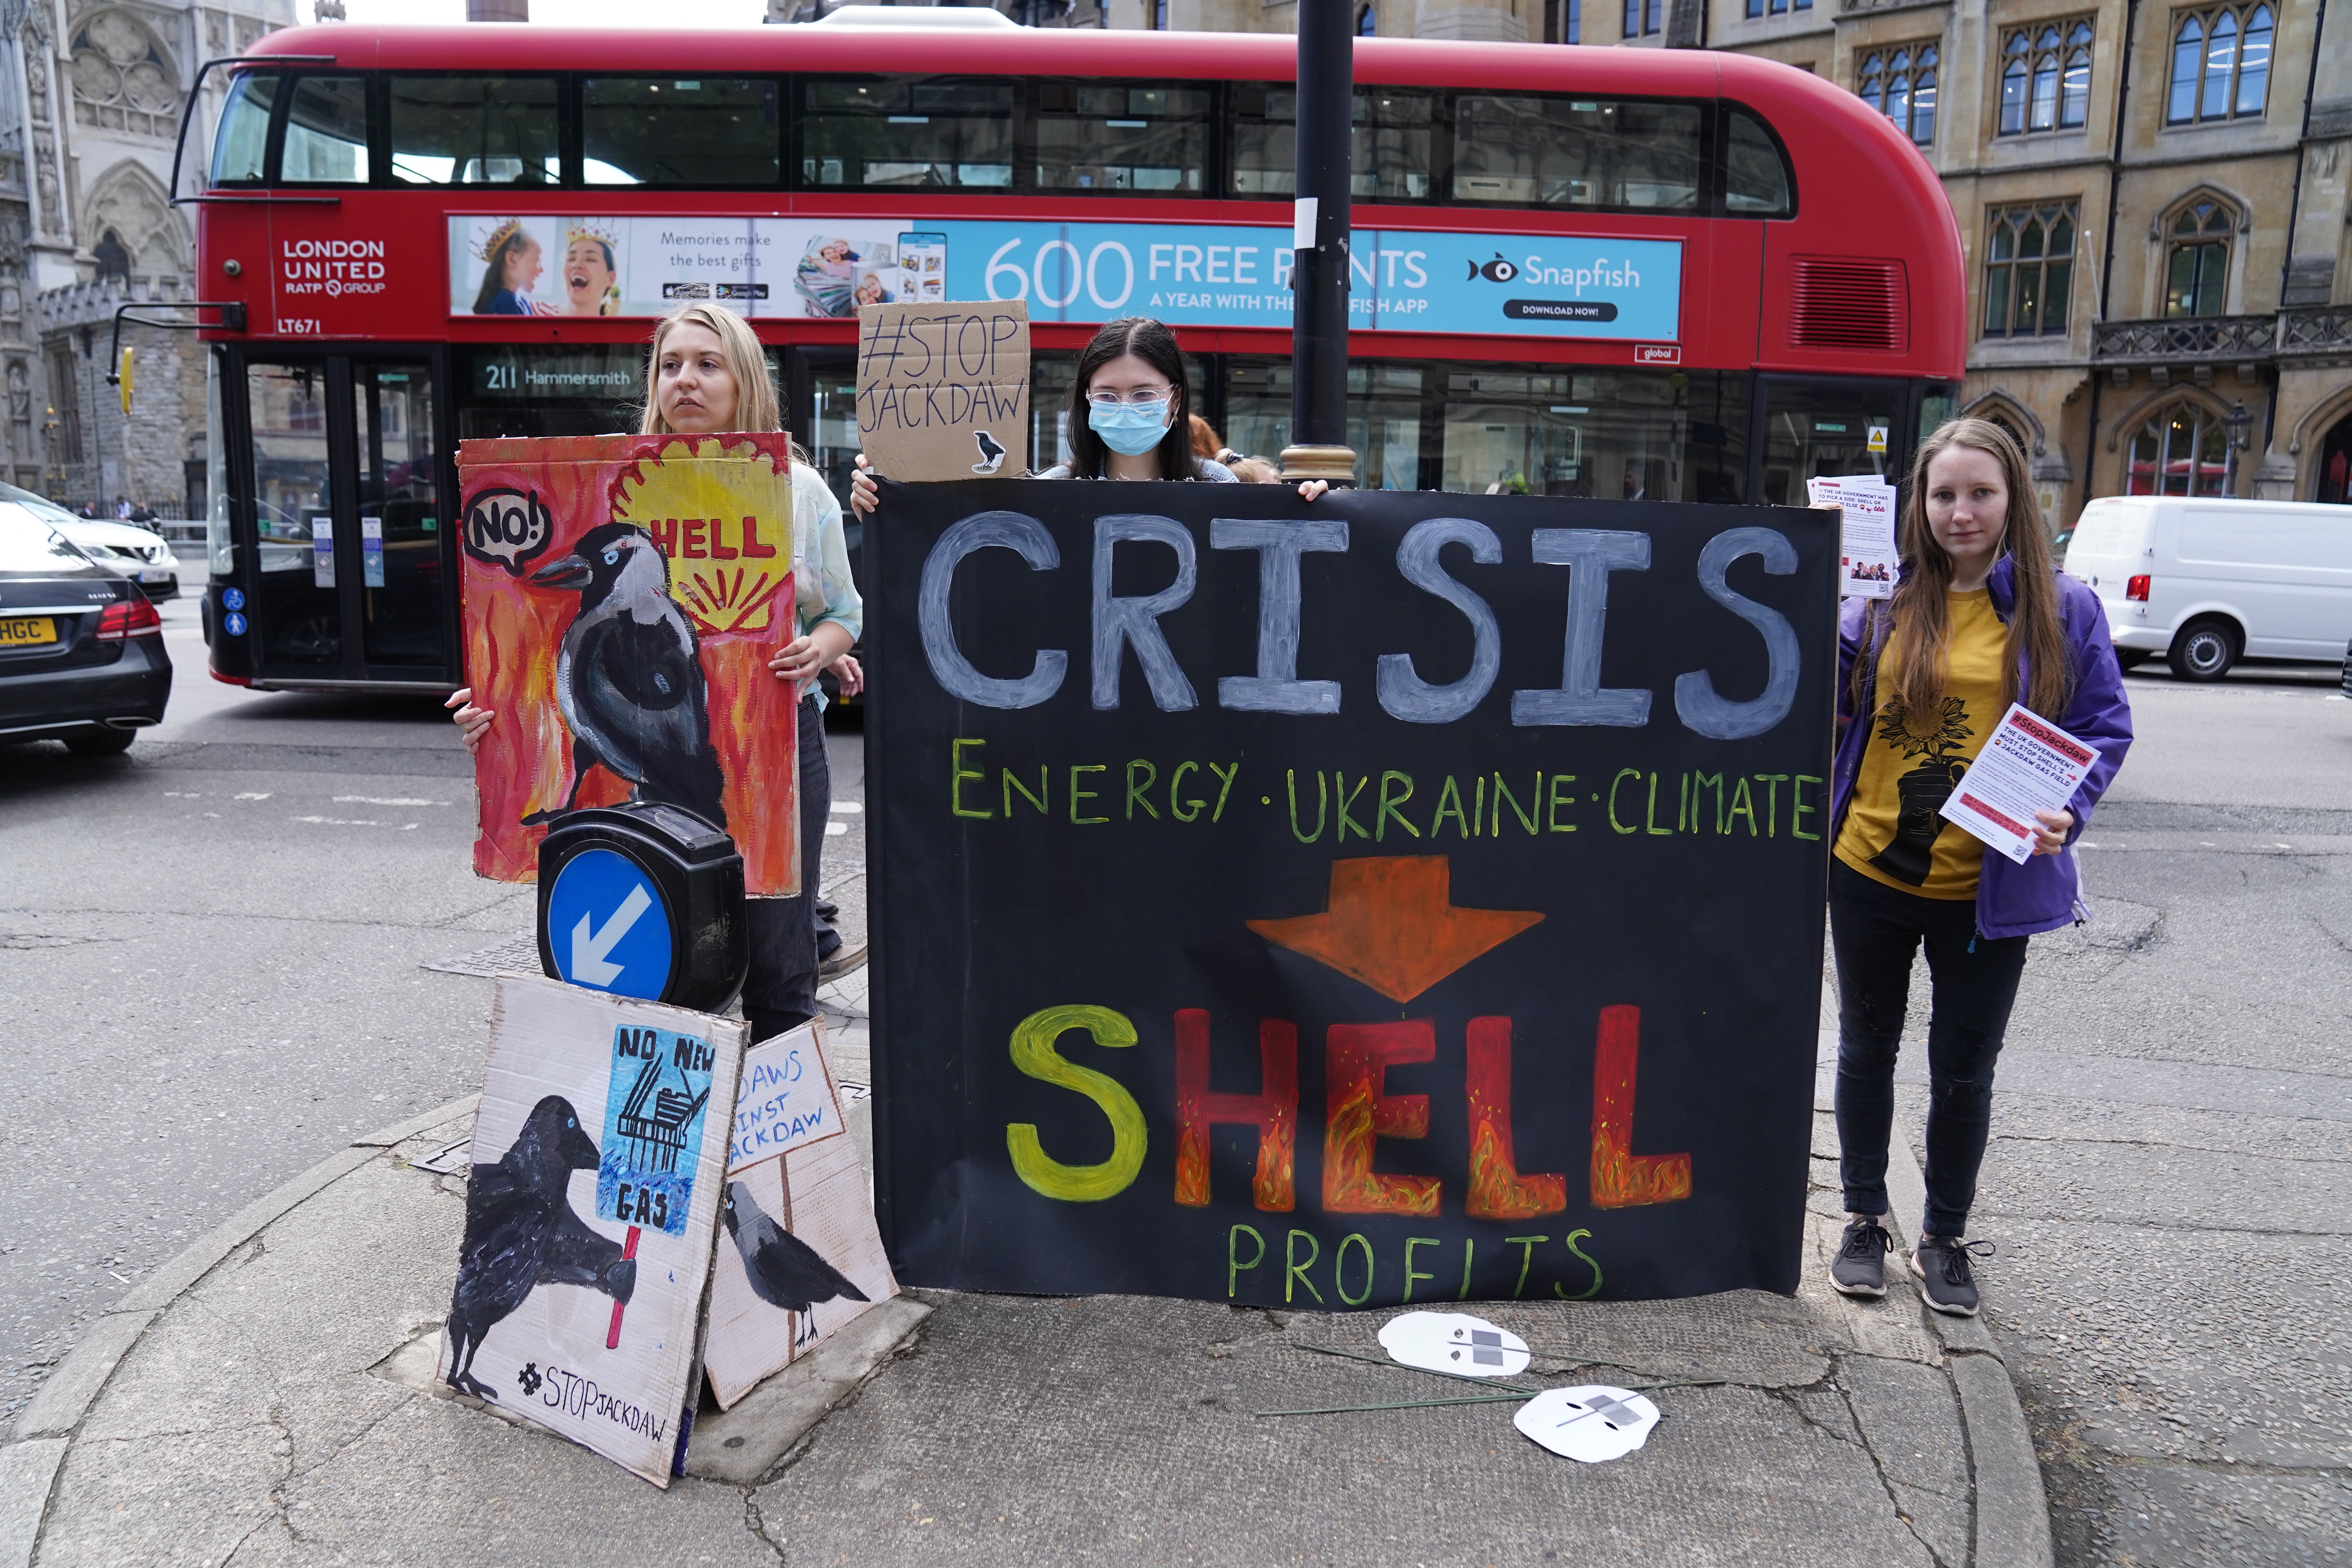 Demonstrators outside Central Hall in Westminster where Shell was holding its annual general meeting